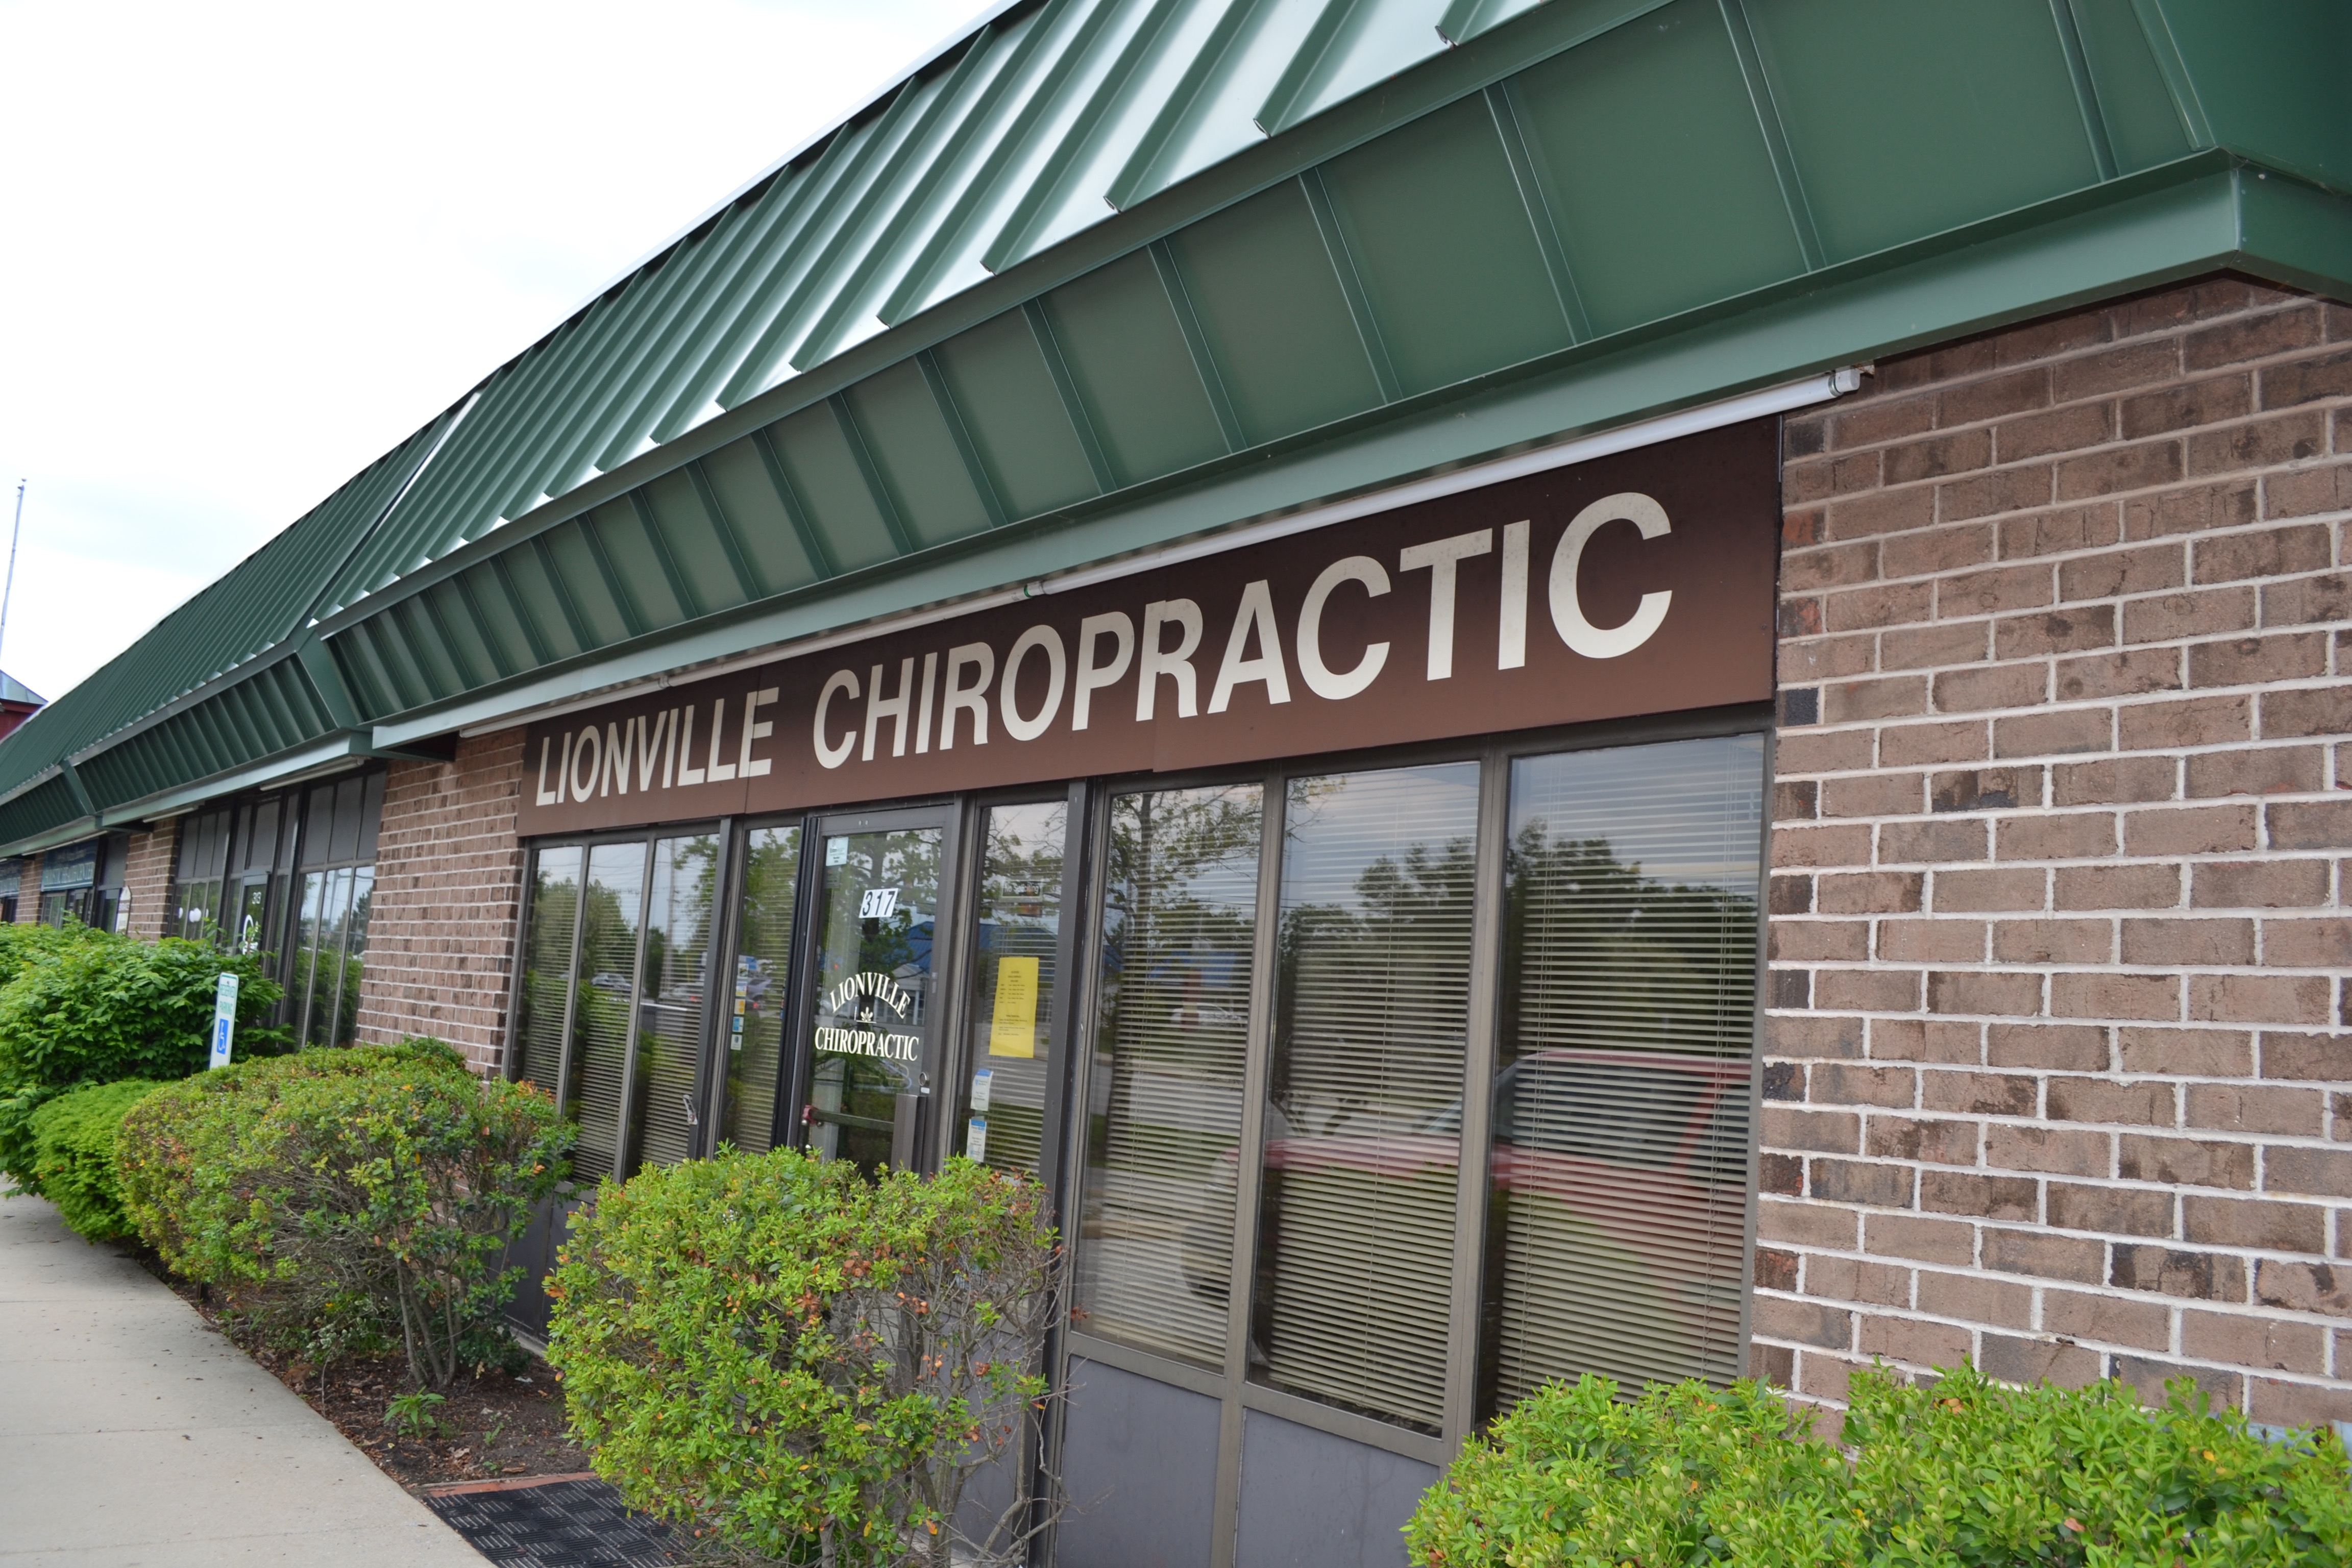 Lionville Chiropractic outside Pic